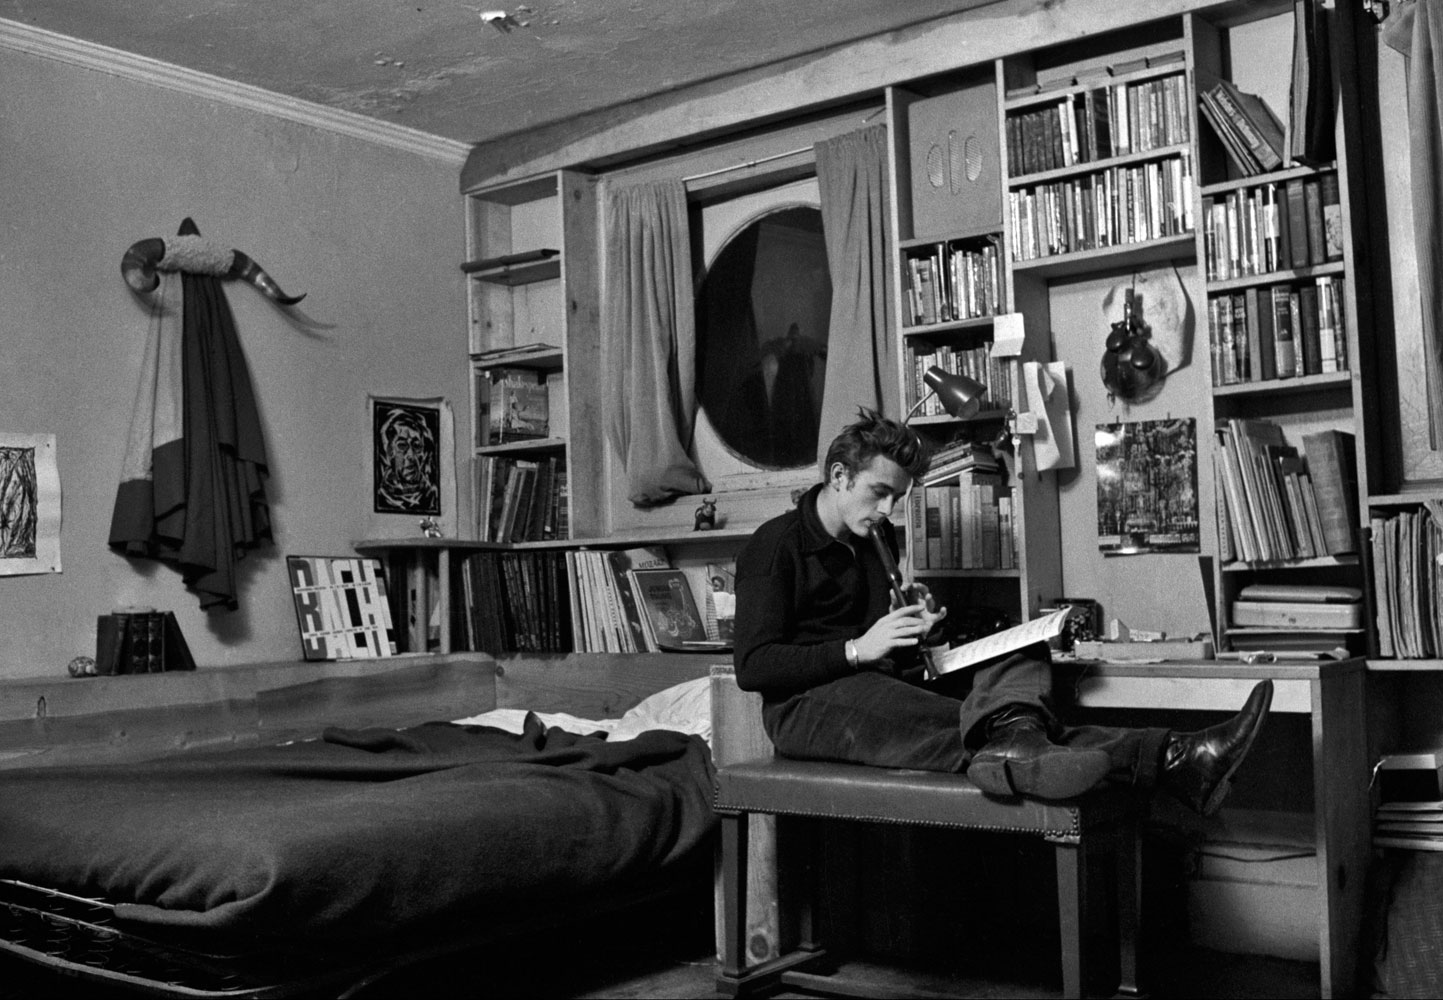 James Dean in his apartment on West 68th Street, New York City, 1955.